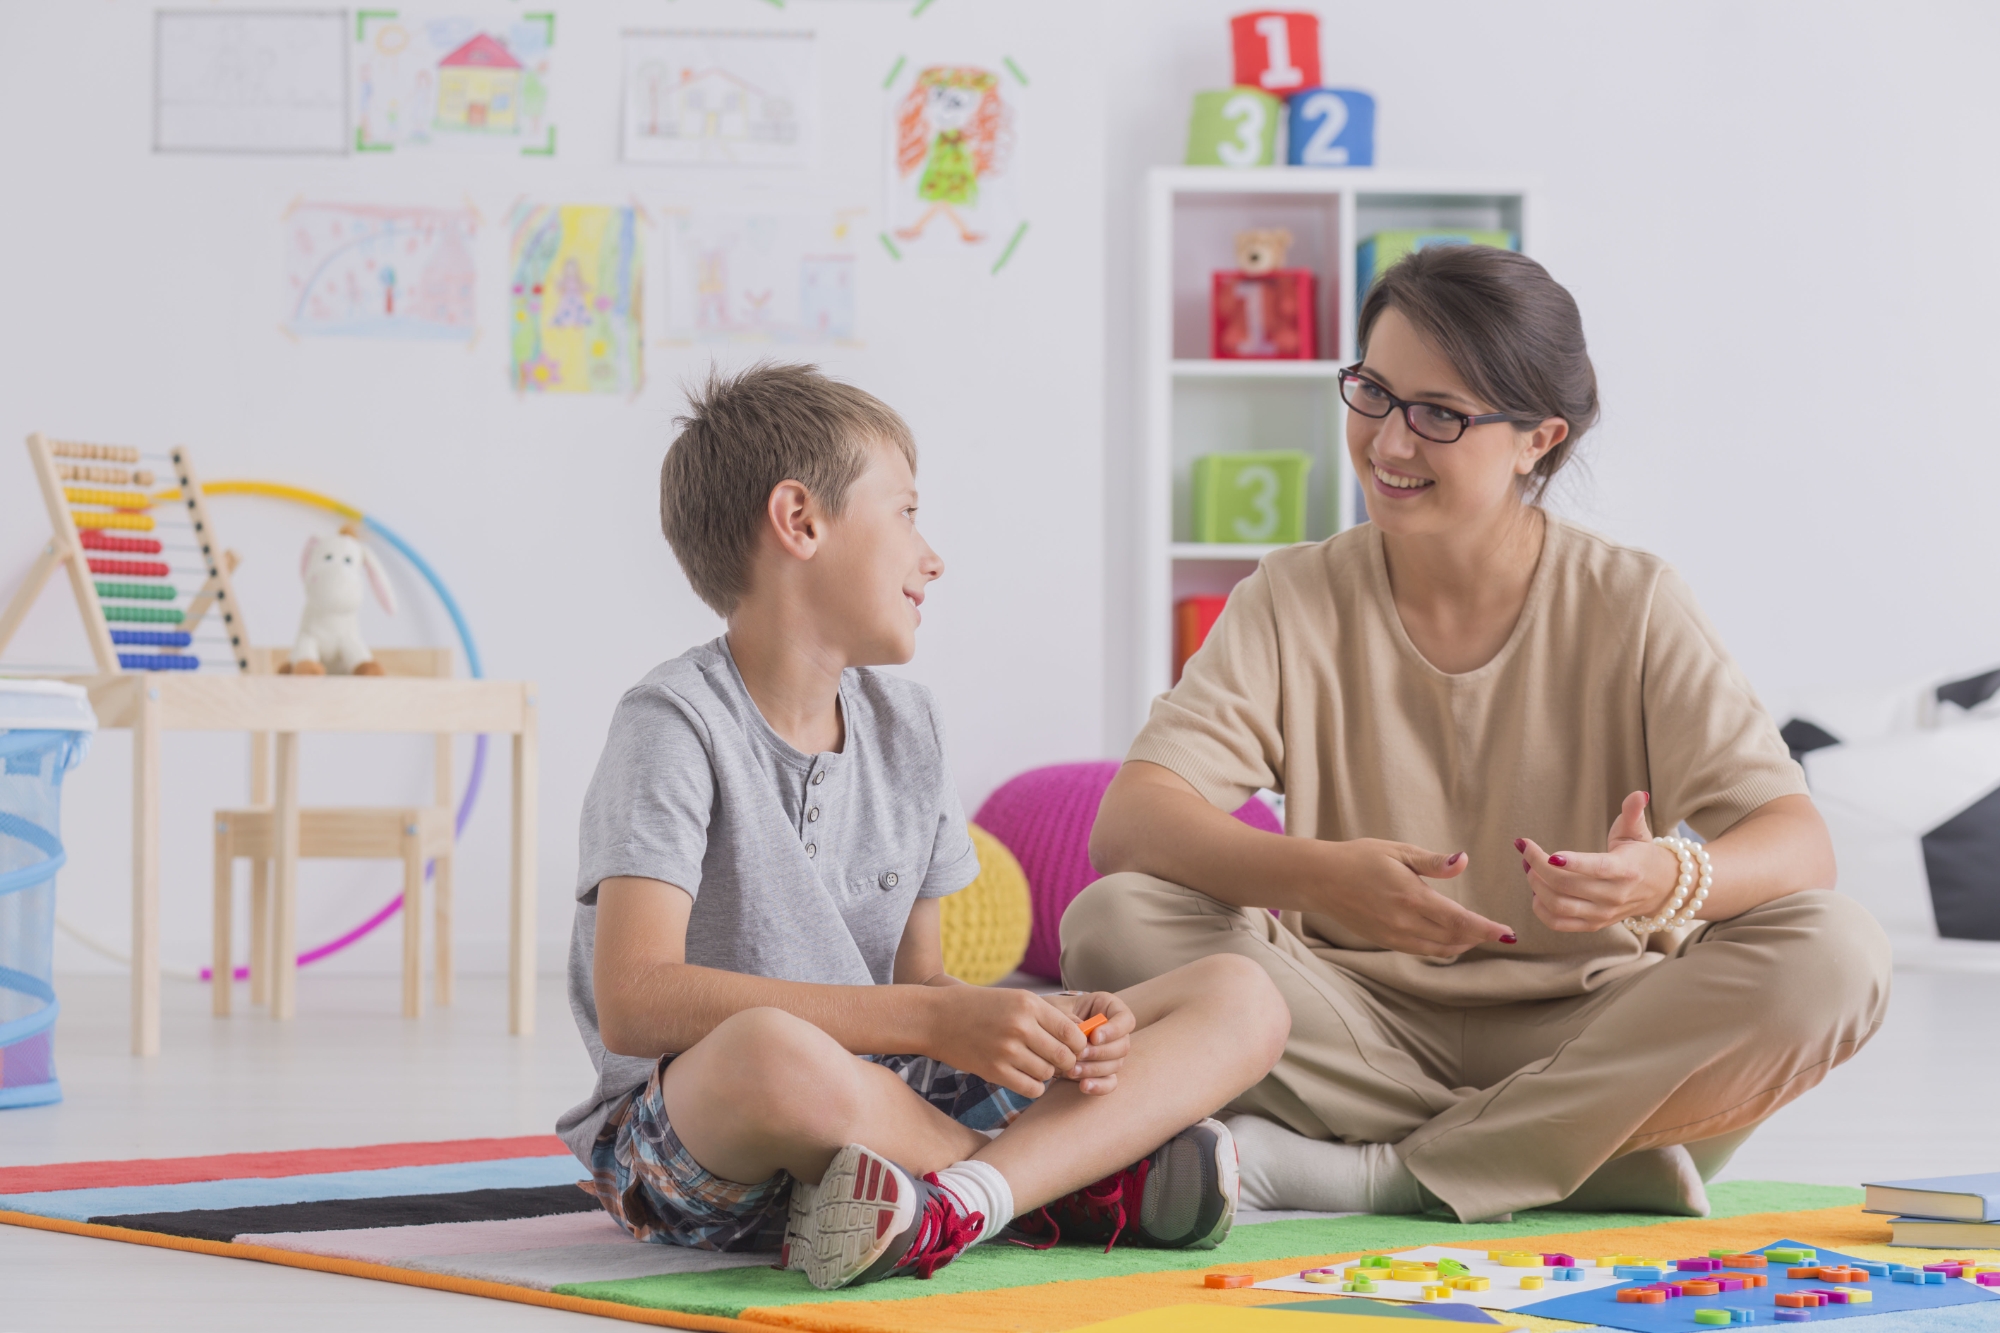 Smiling young boy and therapist sitting on floor and talking in school